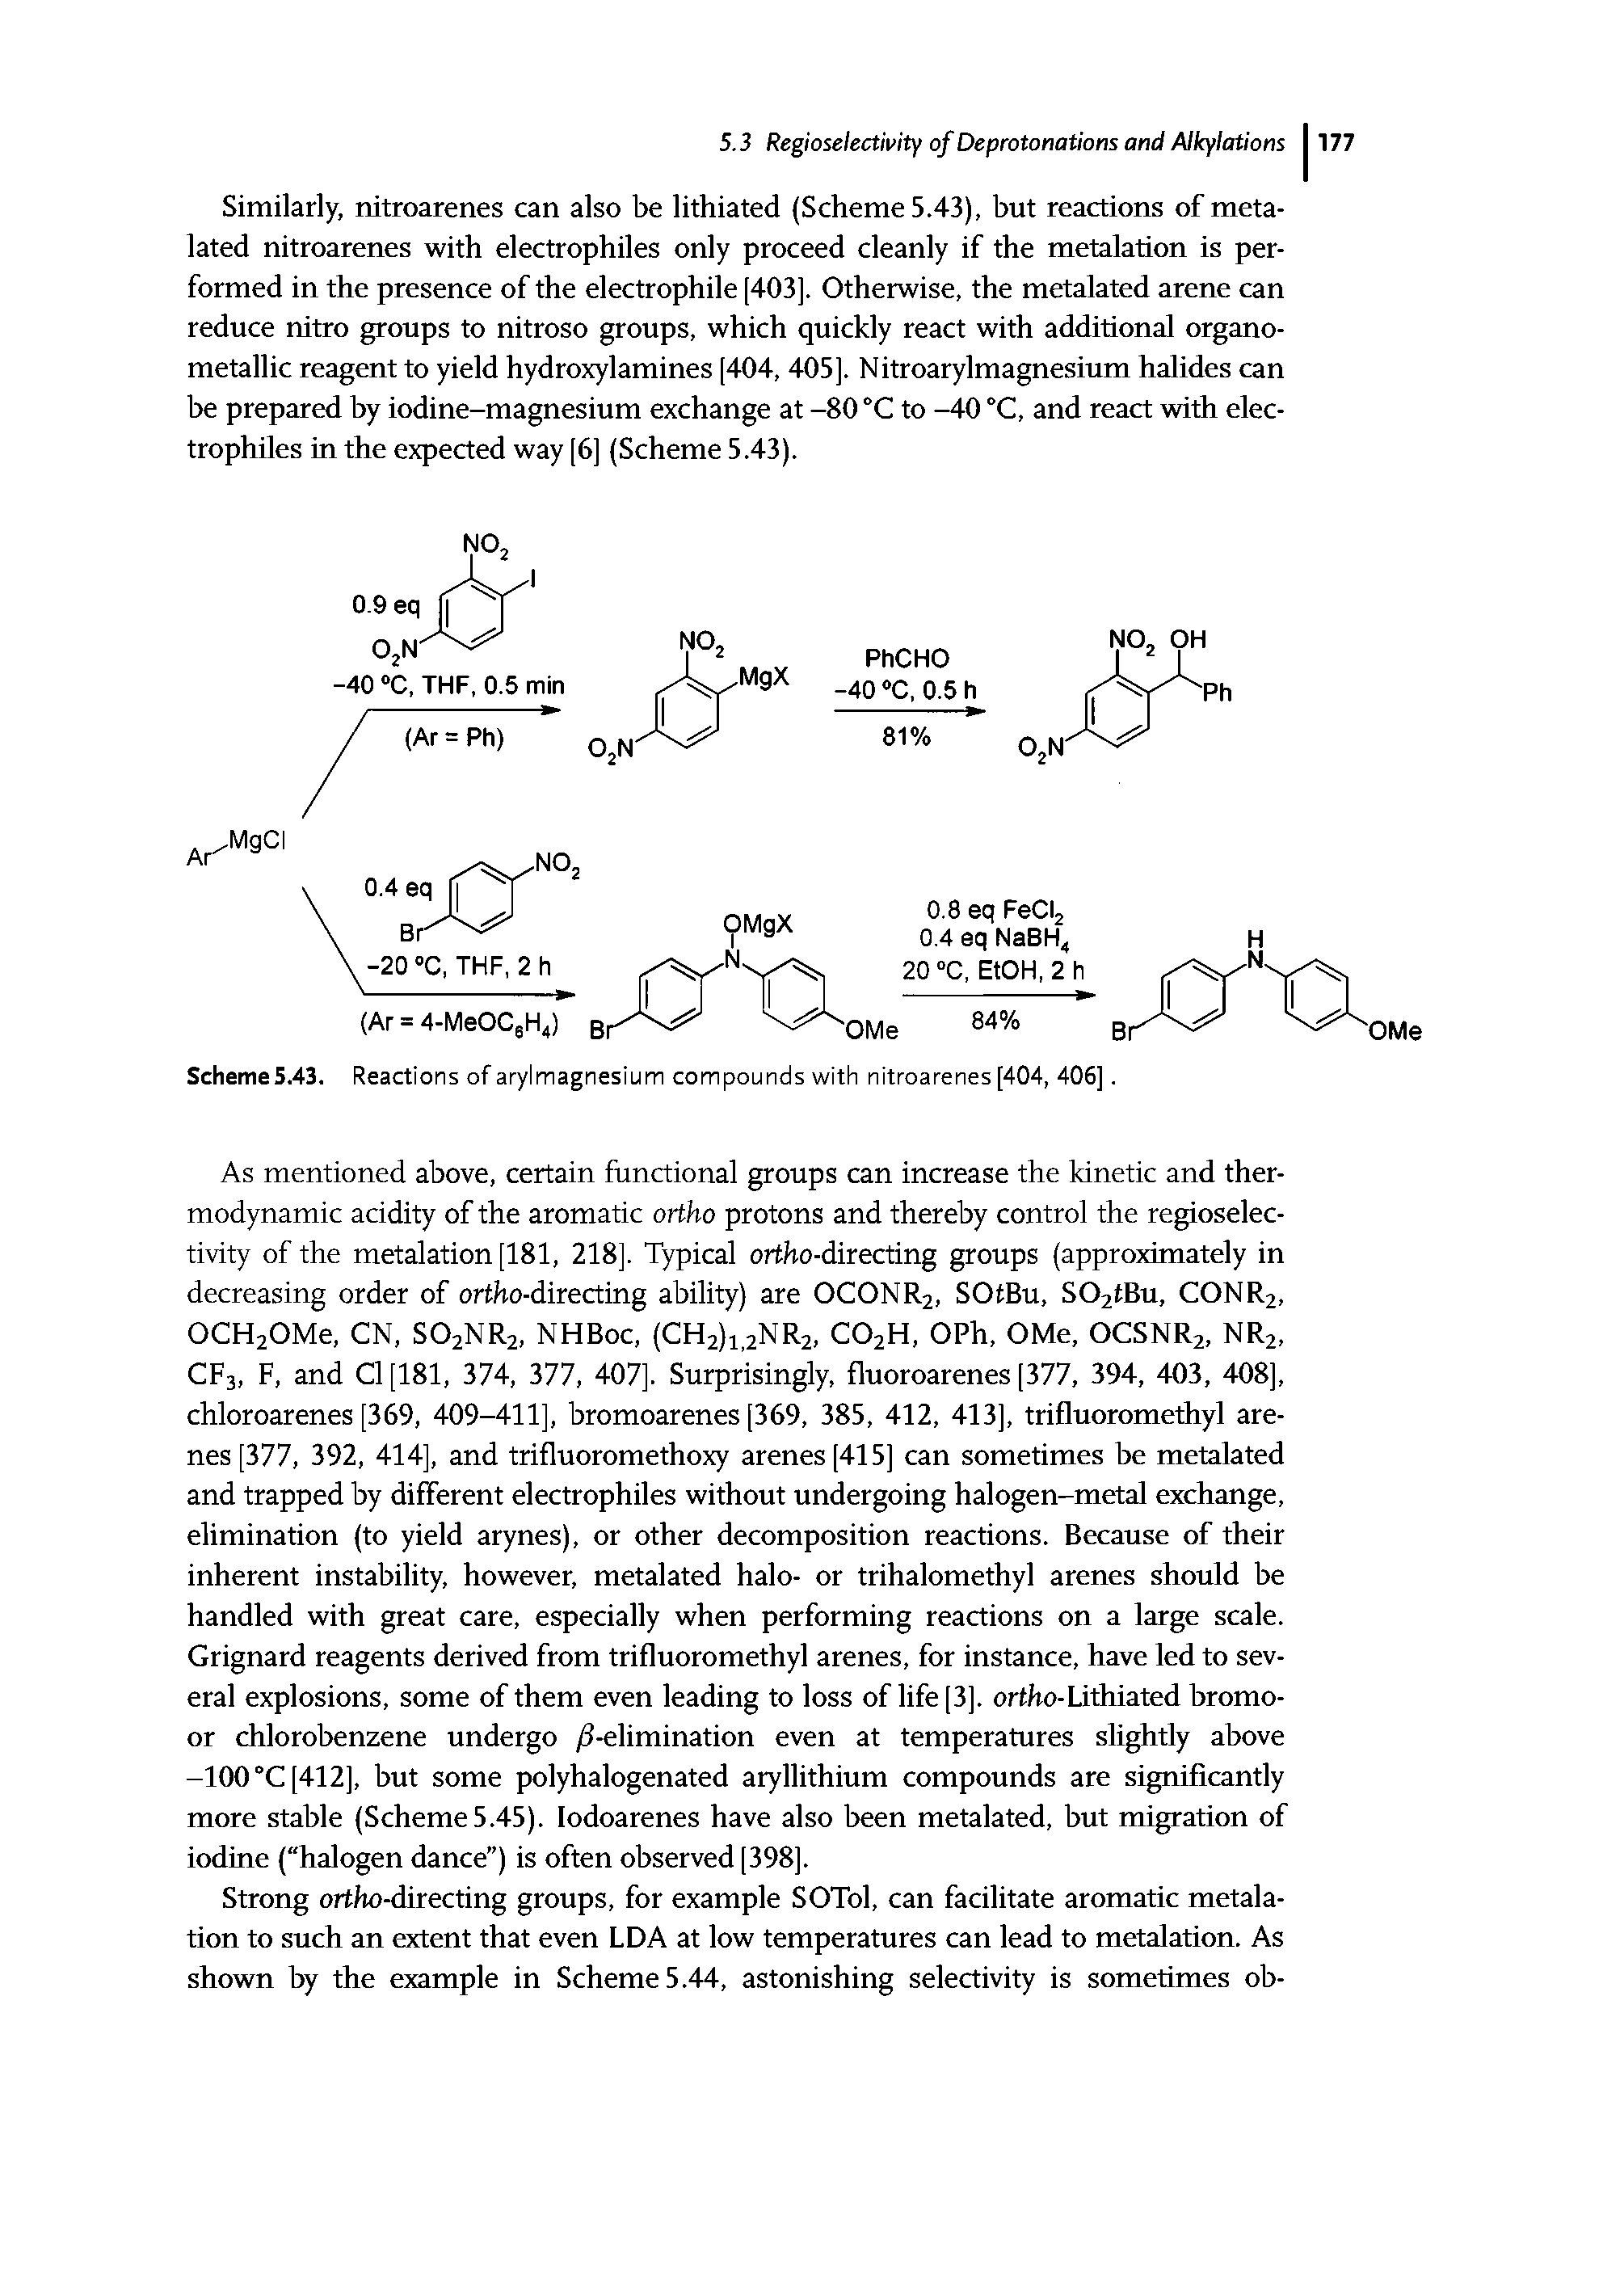 Scheme5.43. Reactions of arylmagnesium compounds with nitroarenes [404, 406].